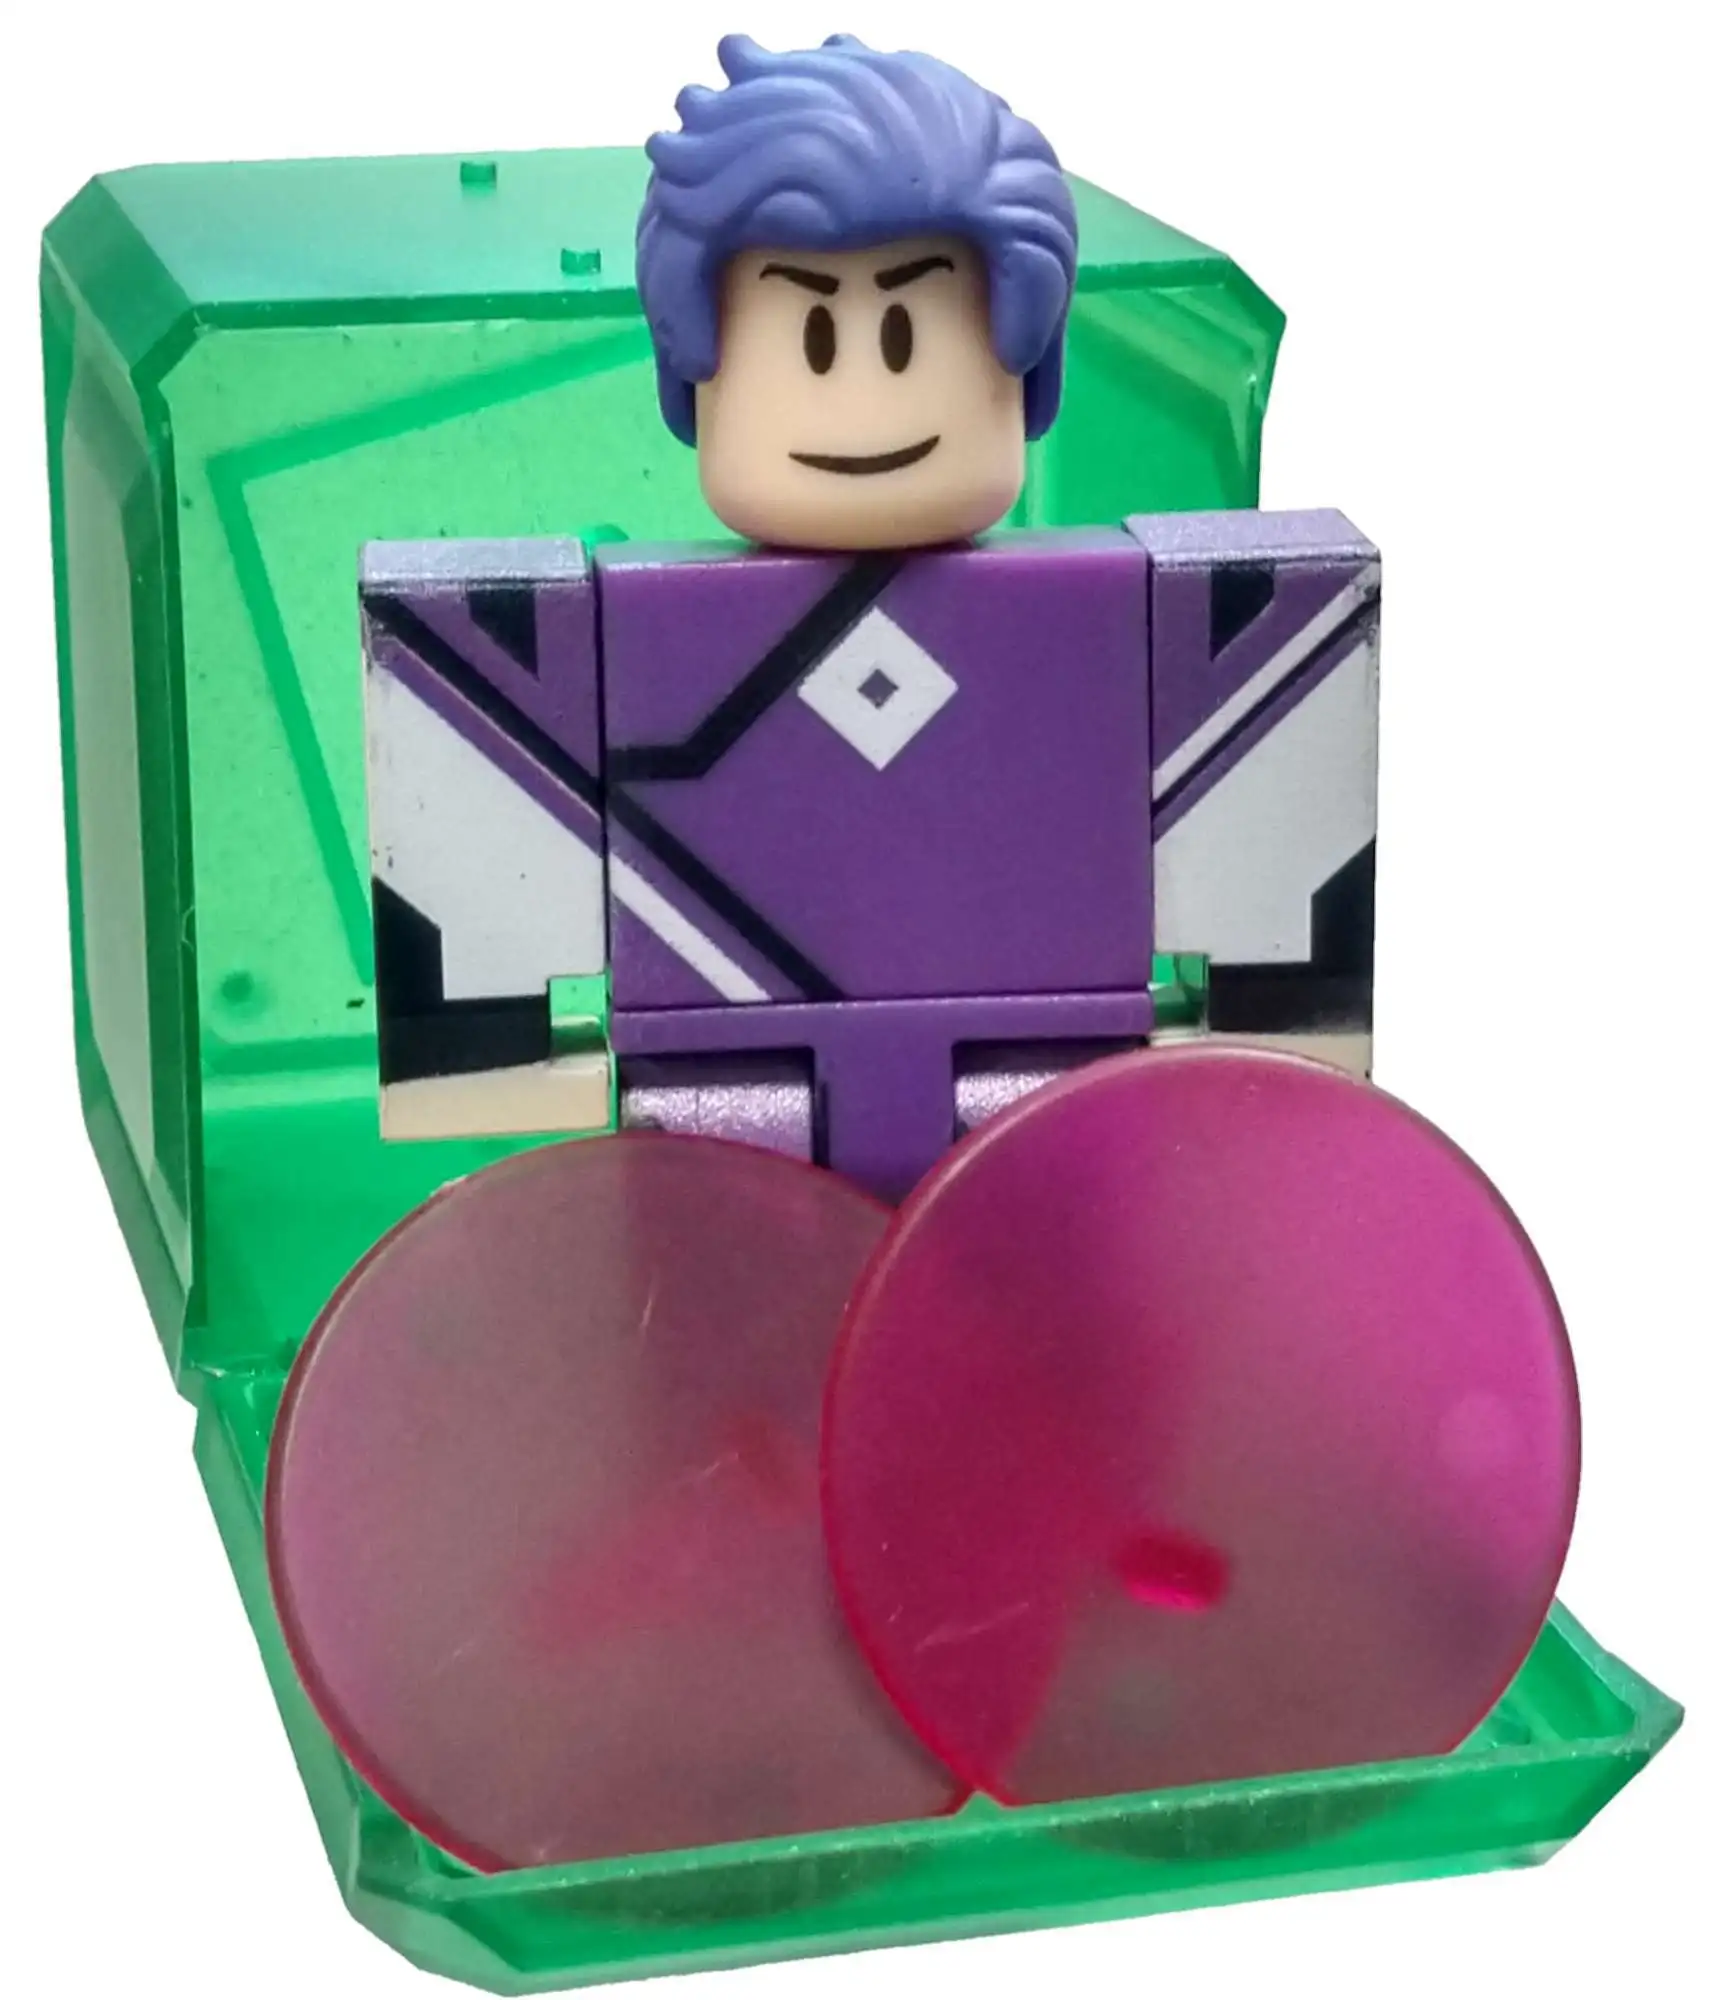  Roblox Action Collection - Heroes of Robloxia Playset